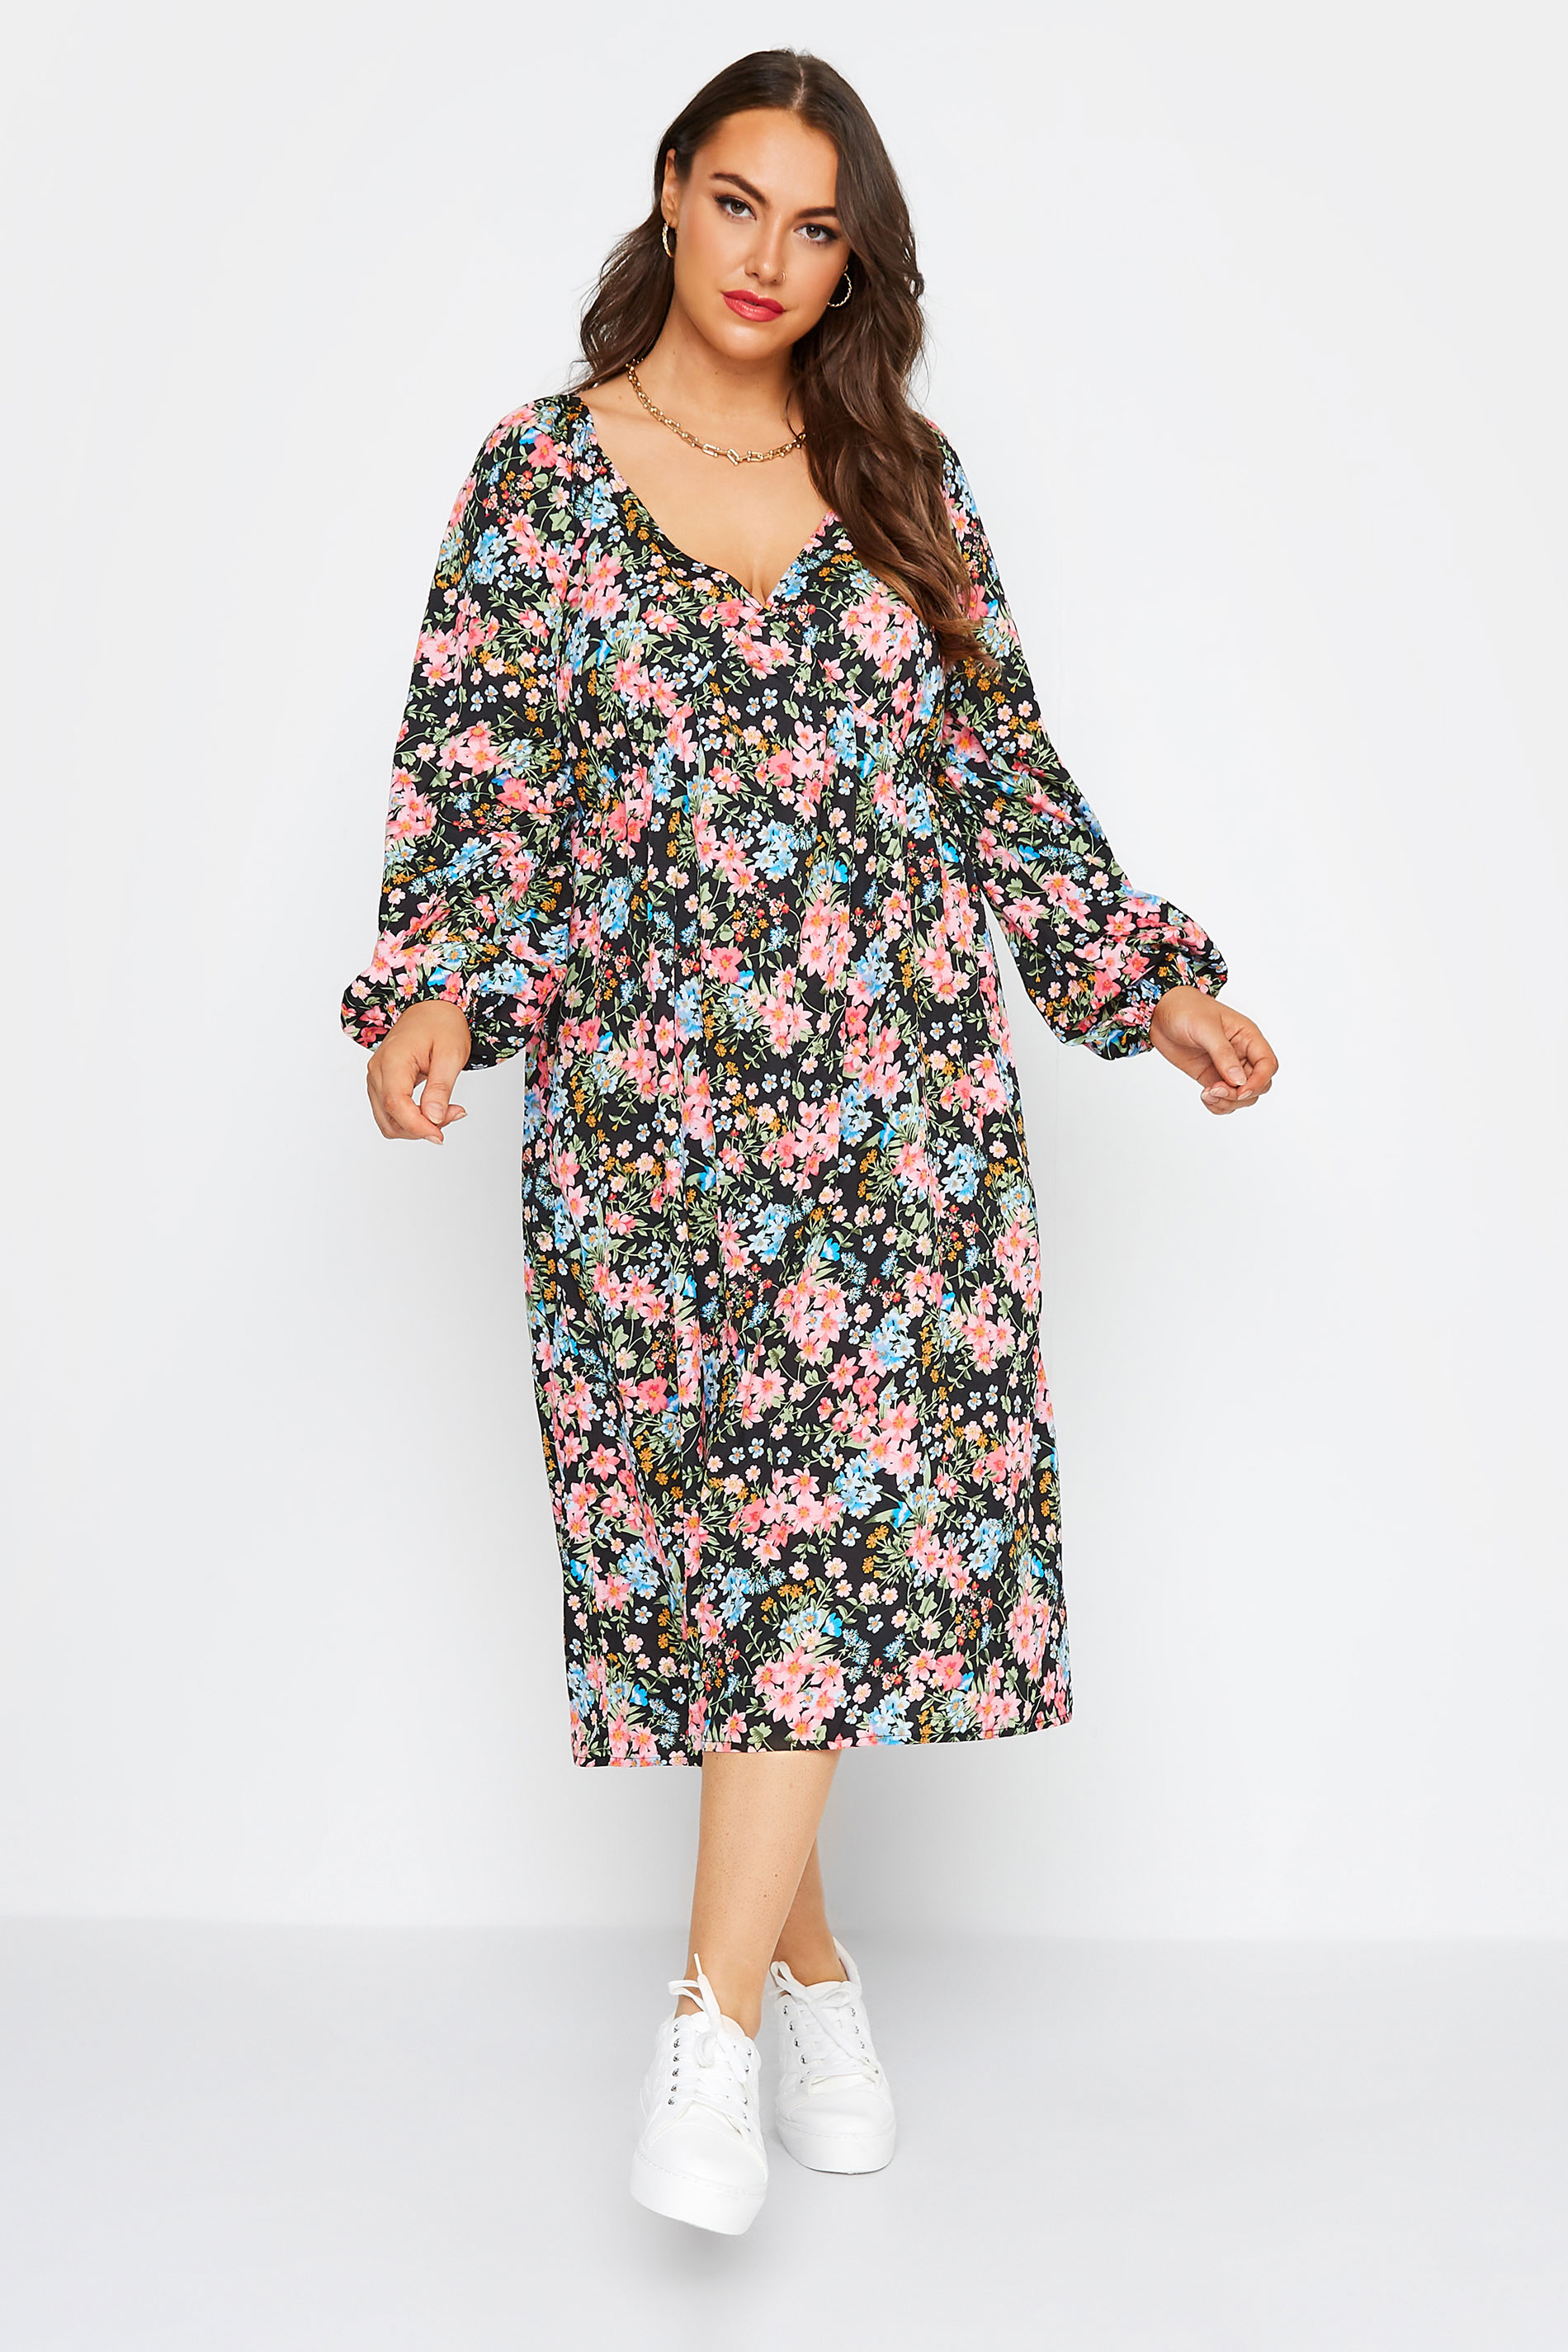 LIMITED COLLECTION  Plus Size Black Floral Balloon Sleeve Midi Dress | Yours Clothing  2